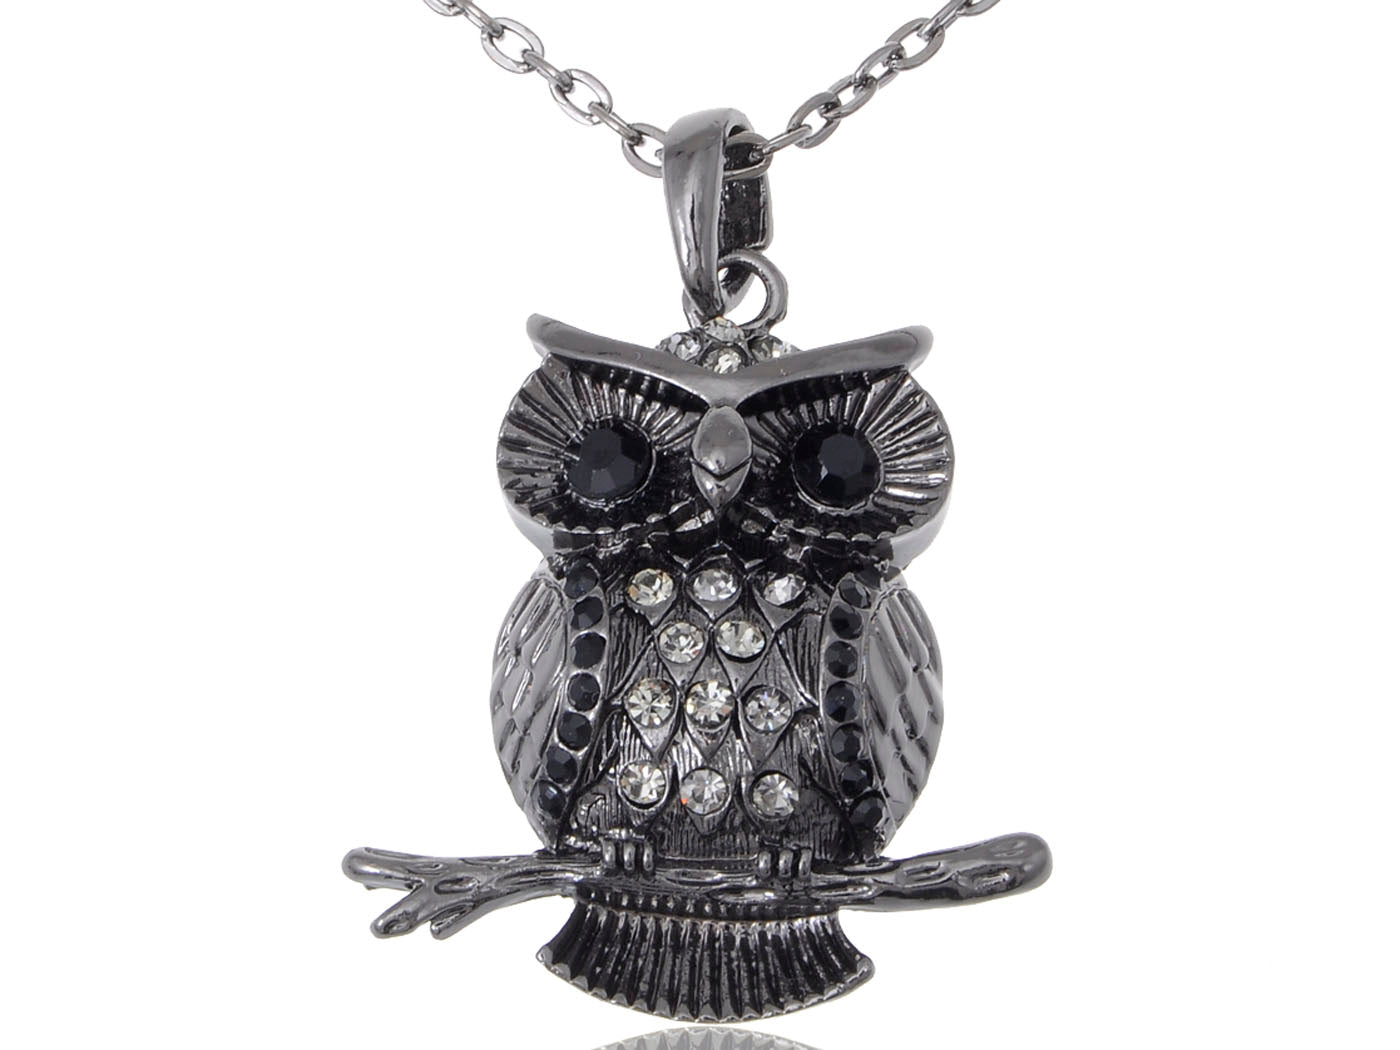 Calm Jet Black Night Owl Perched Branch Tree Pendant Necklace